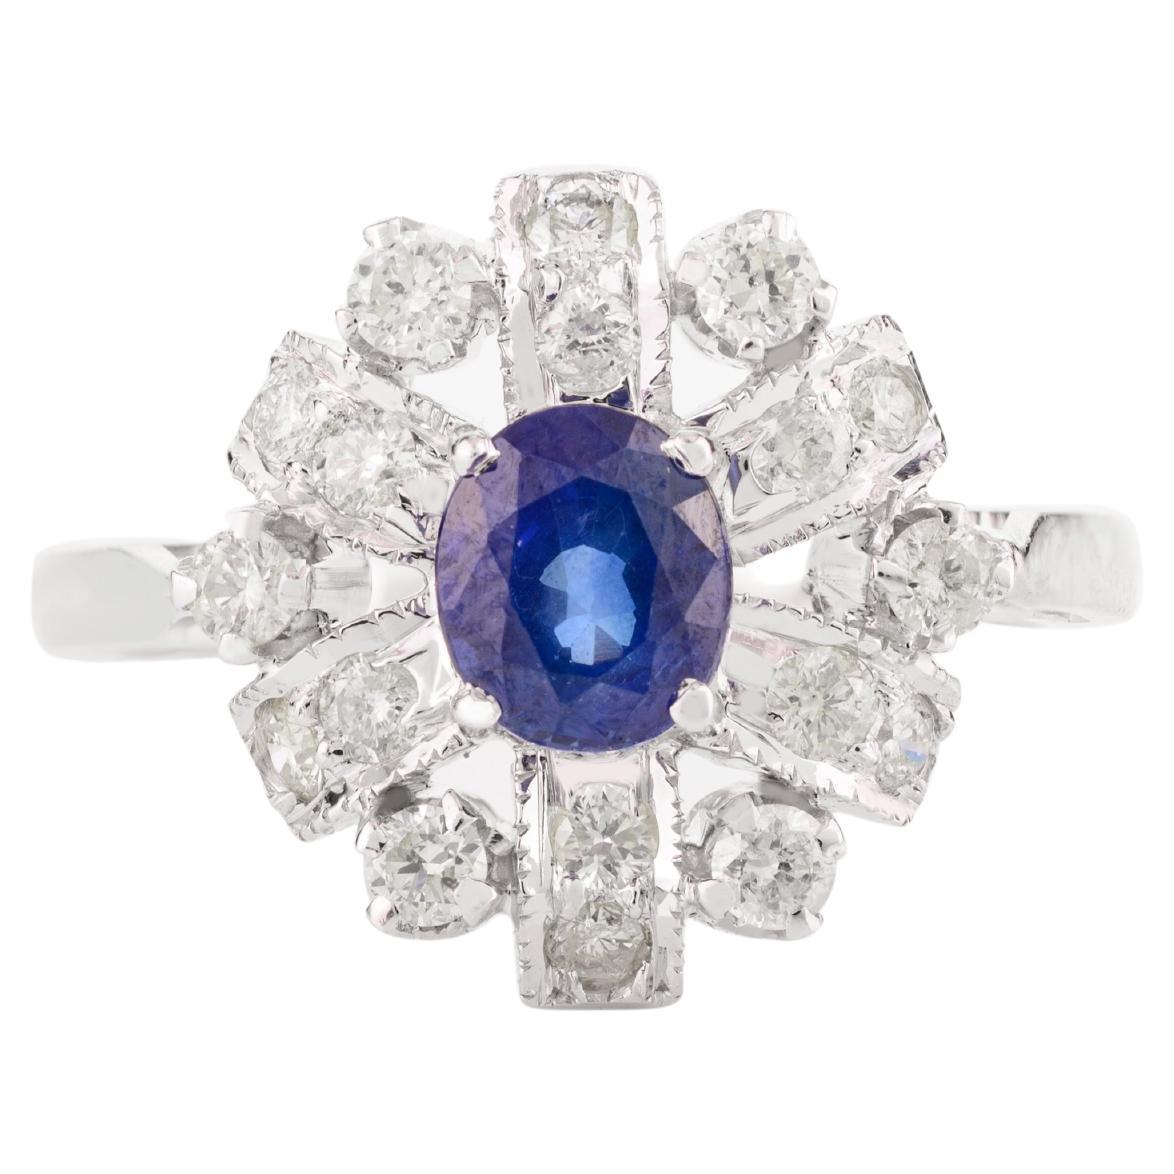 14k Solid White Gold Floral Halo Diamond and Blue Sapphire Ring Gift for Women